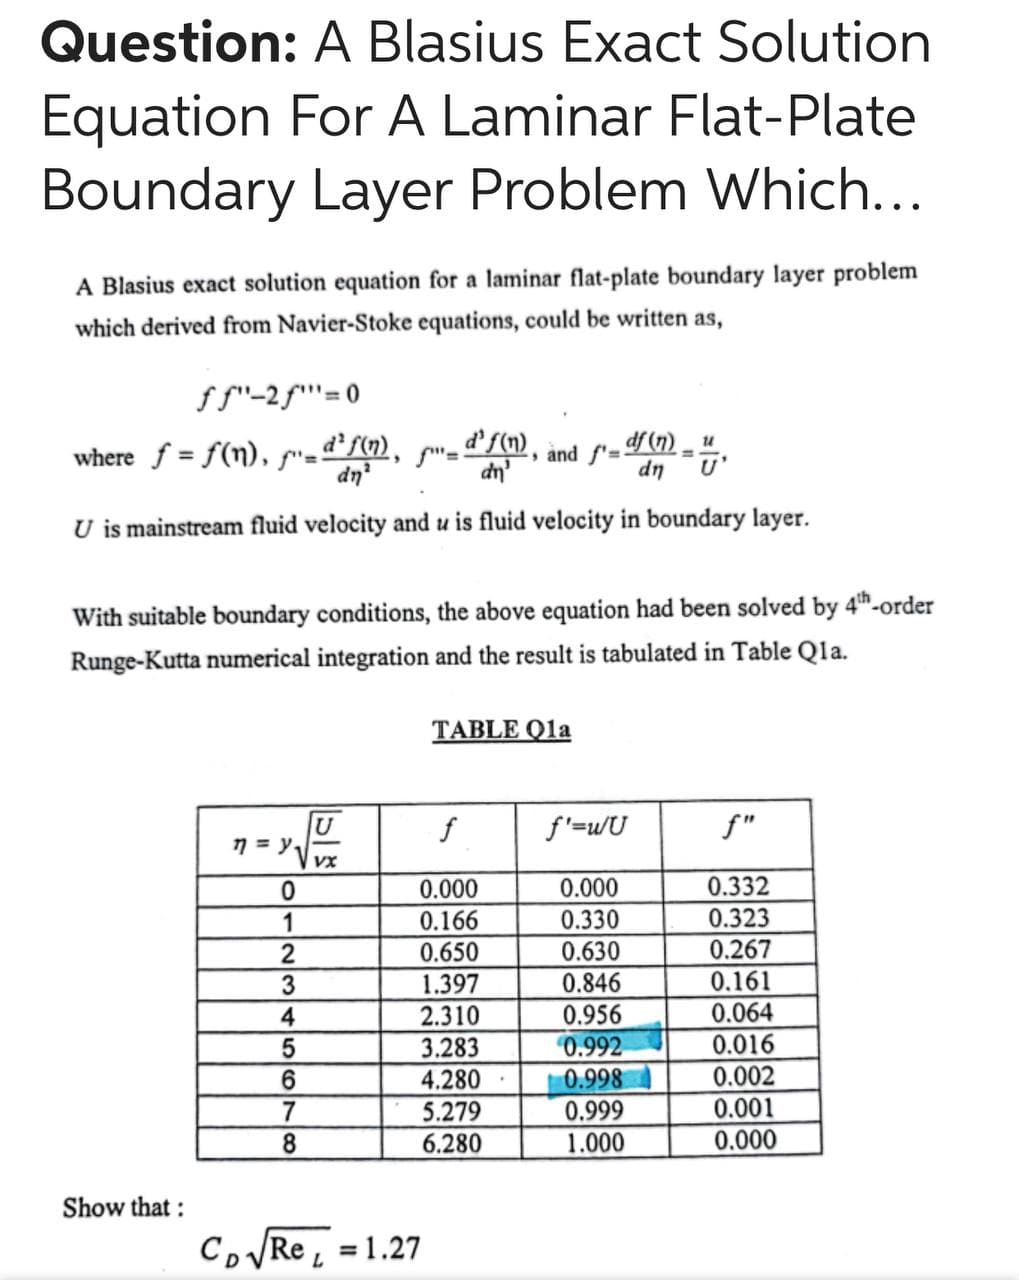 Question: A Blasius Exact Solution
Equation For A Laminar Flat-Plate
Boundary Layer Problem Which...
A Blasius exact solution equation for a laminar flat-plate boundary layer problem
which derived from Navier-Stoke equations, could be written as,
ff"-2f"'=0
where f = f(n), =d'fm),
dn?
d'f(n).
df (N) =-
,and f'=-
dn'
dn
U is mainstream fluid velocity and u is fluid velocity in boundary layer.
With suitable boundary conditions, the above equation had been solved by 4th-order
Runge-Kutta numerical integration and the result is tabulated in Table Qla.
TABLE Qla
f'=w/U
f"
7 = y,
VX
0.000
0.000
0.332
0.323
0.267
1
0.166
0.330
0.630
0.846
0.956
0.992
0.998
0.650
1.397
2.310
3.283
0.161
0.064
3
4
0.016
0.002
6
7
4.280
0.001
5.279
6.280
0.999
1.000
0.000
Show that :
CoRe , = 1.27
%3D
